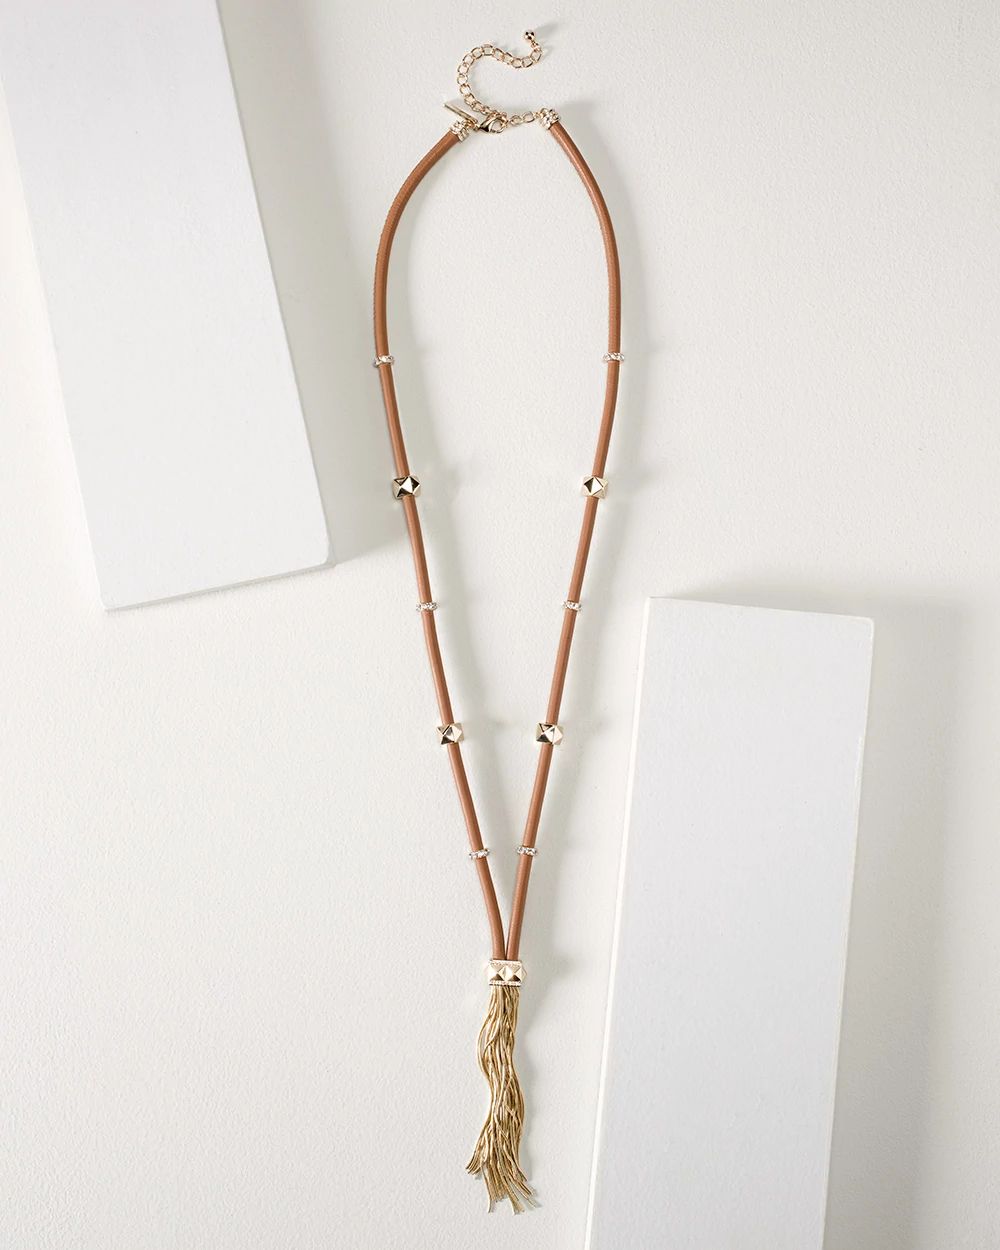 Goldtone & Vachetta Leather Tassel Necklace click to view larger image.